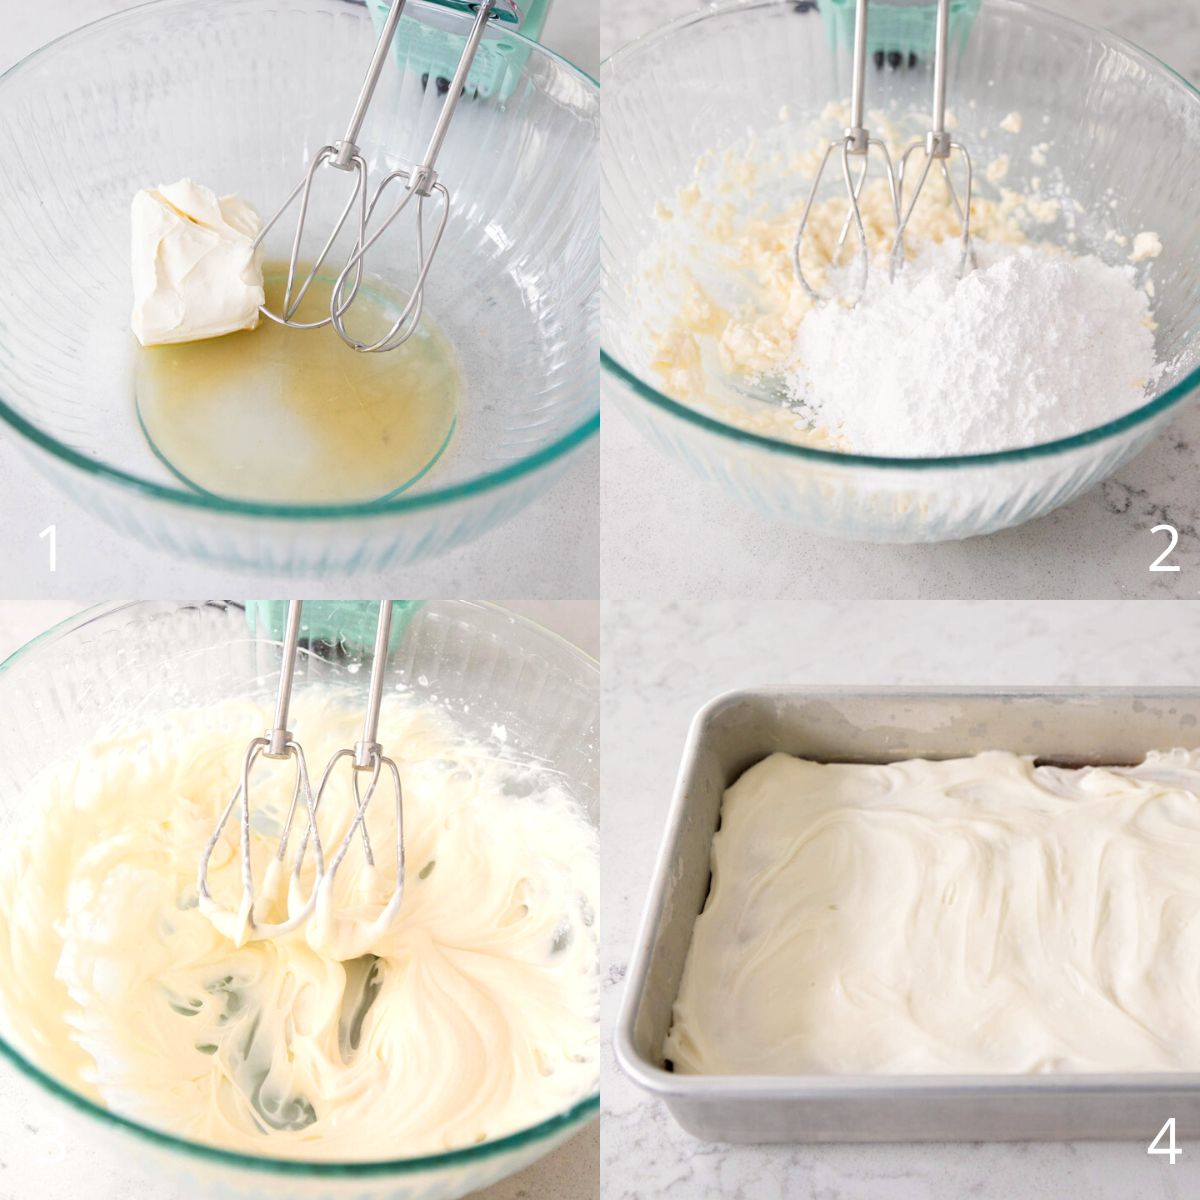 The step by step photos show how to make the vanilla icing that frosts the cookie bars.